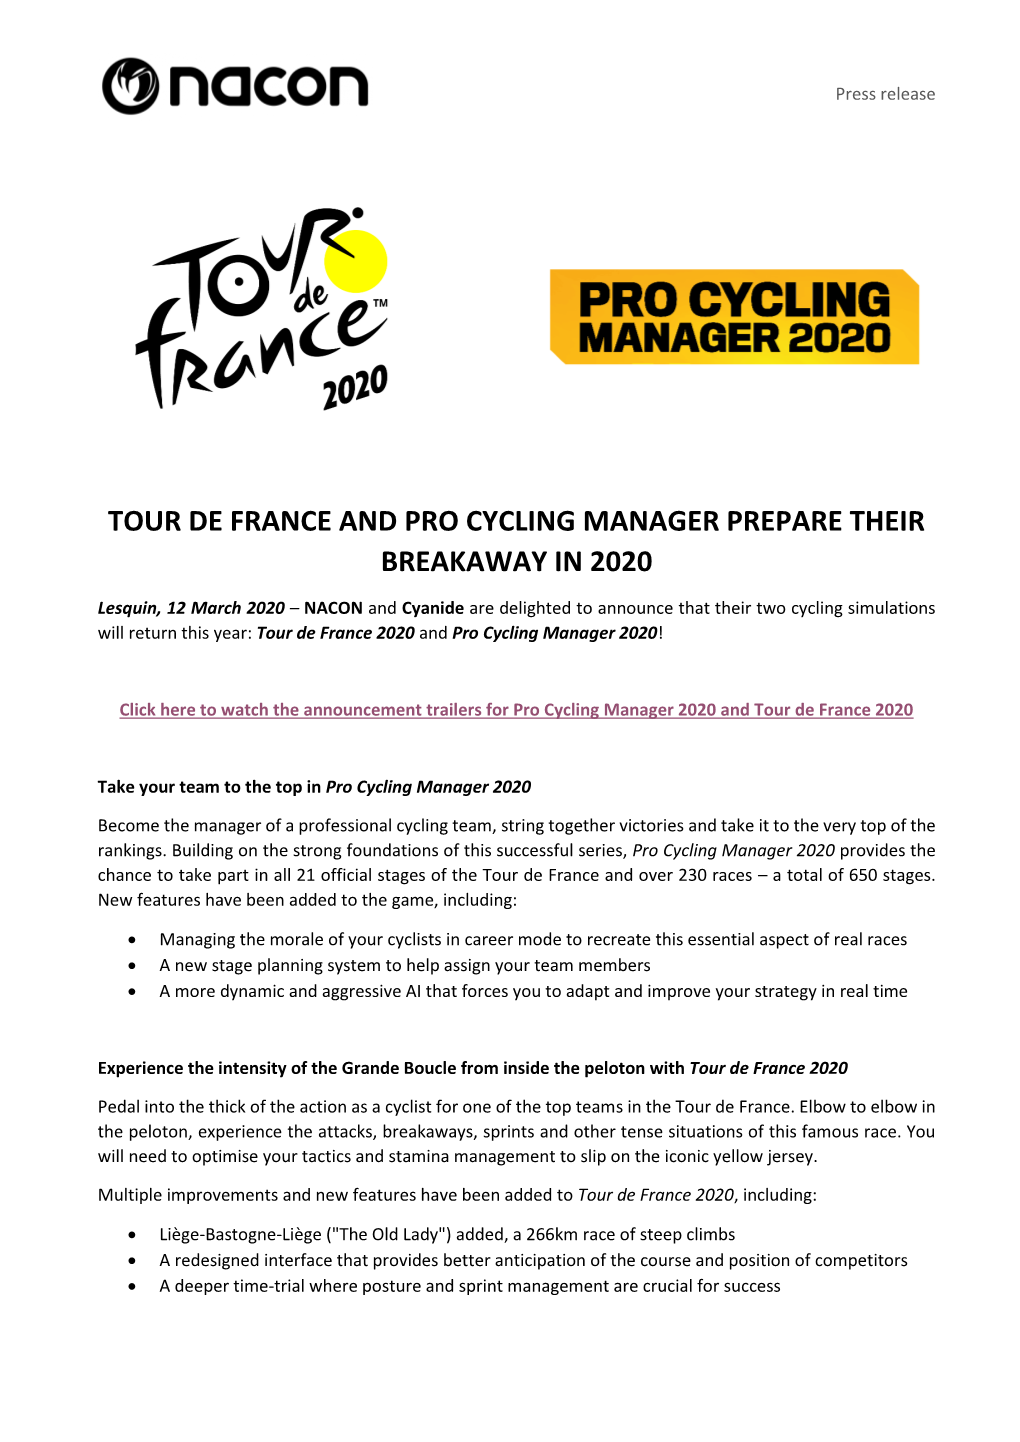 Tour De France and Pro Cycling Manager Prepare Their Breakaway in 2020